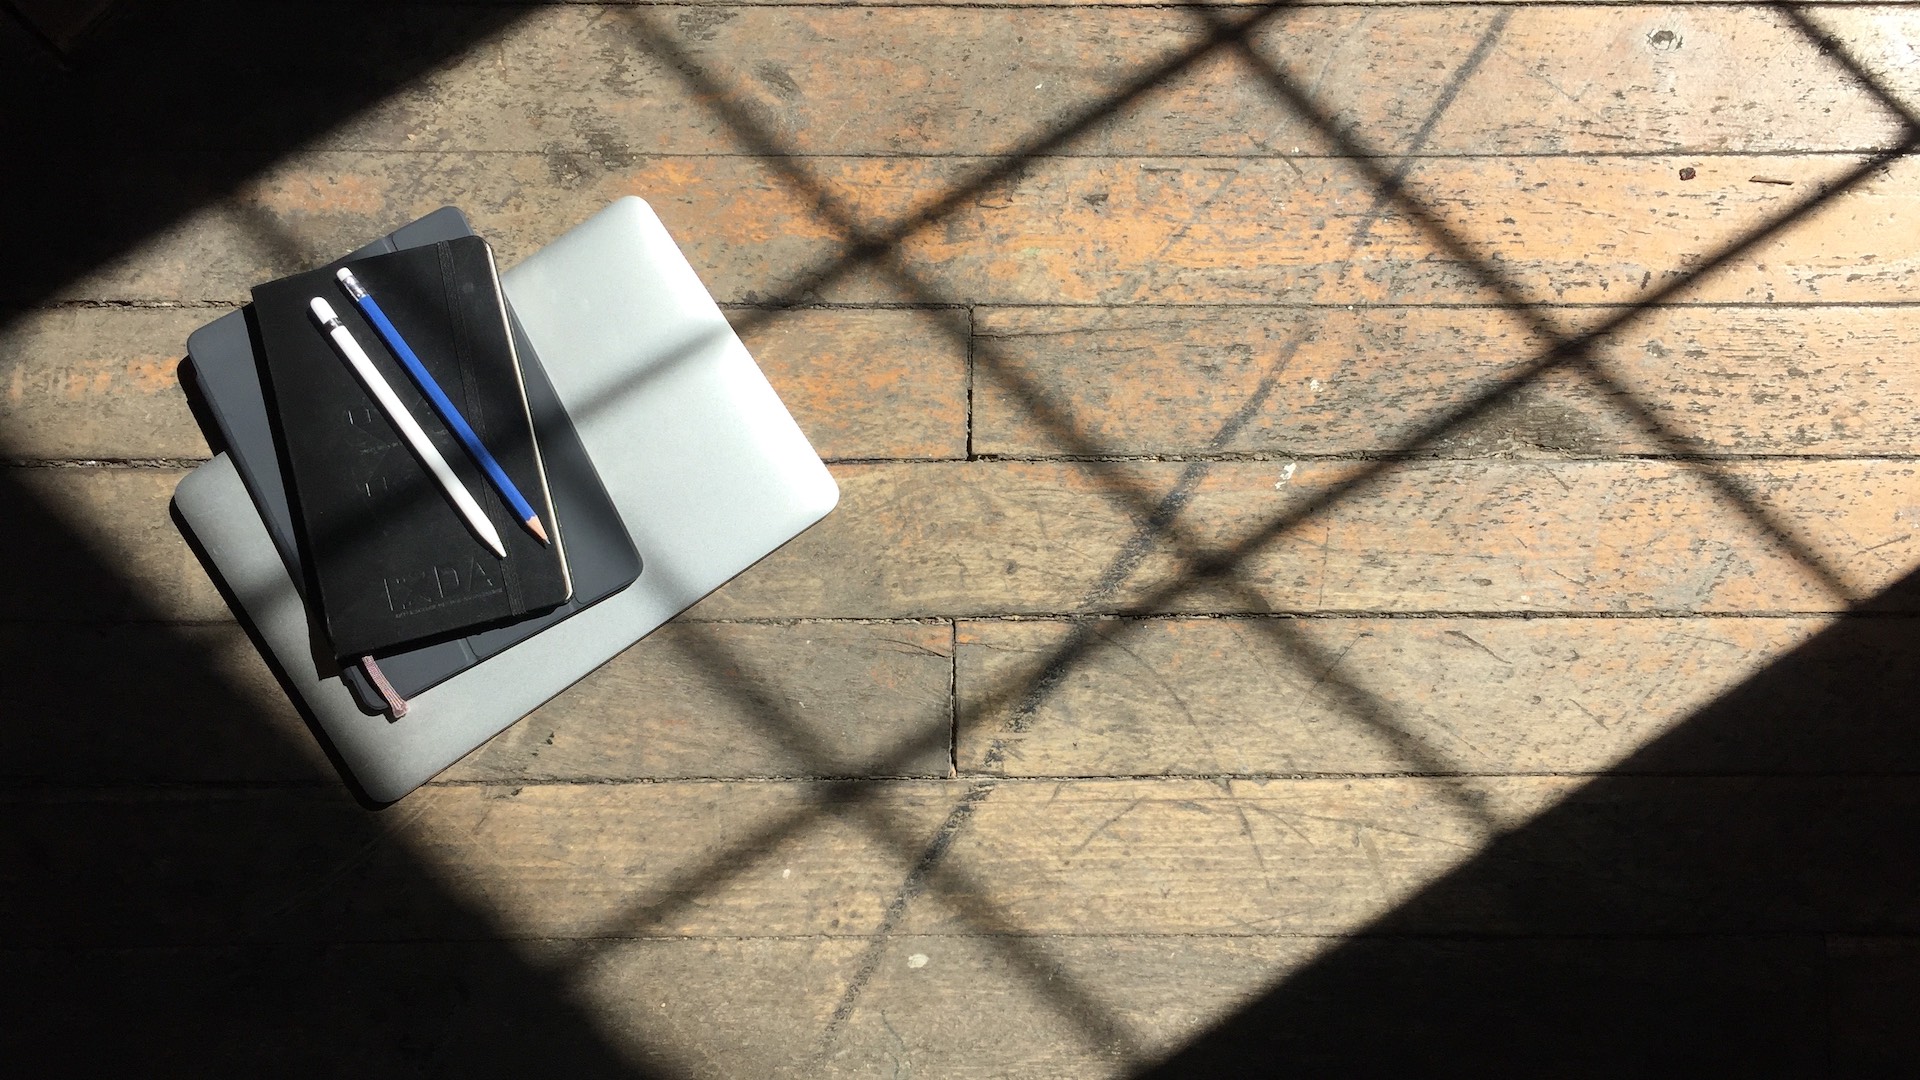 A notebook and laptop sit on a wooden floor